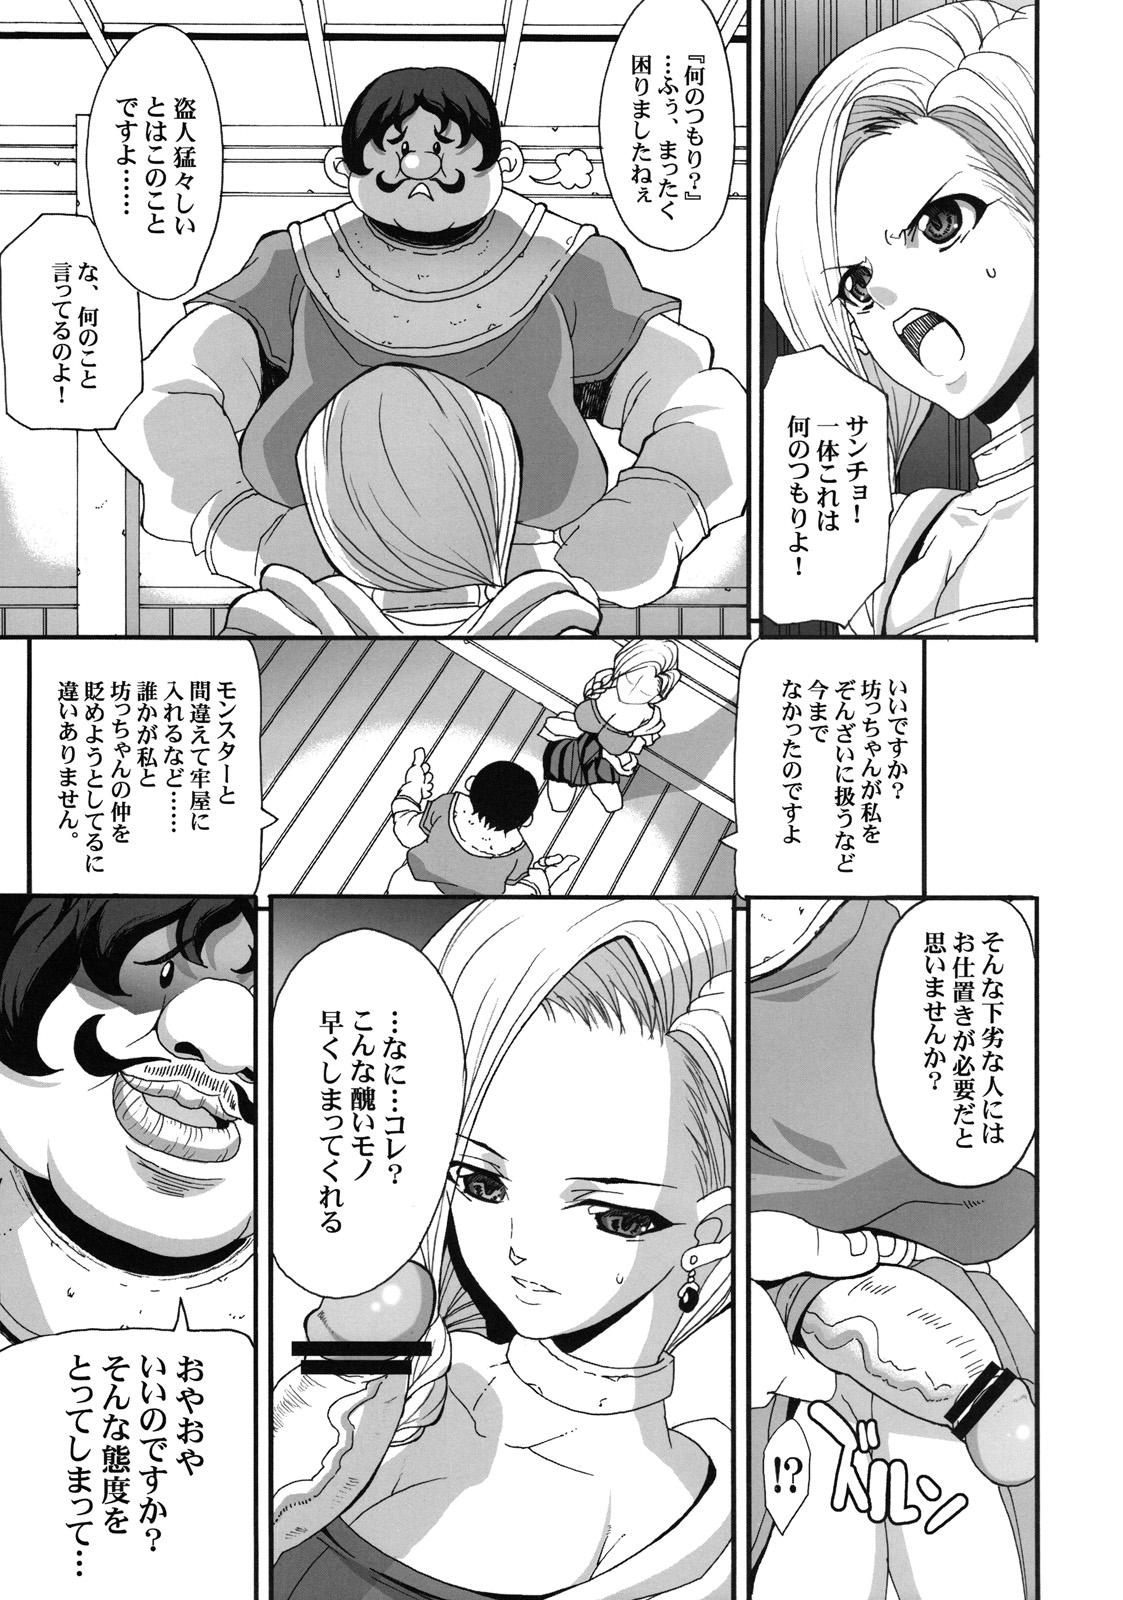 Calle The Sancho - Dragon quest v Gay Fucking - Page 7